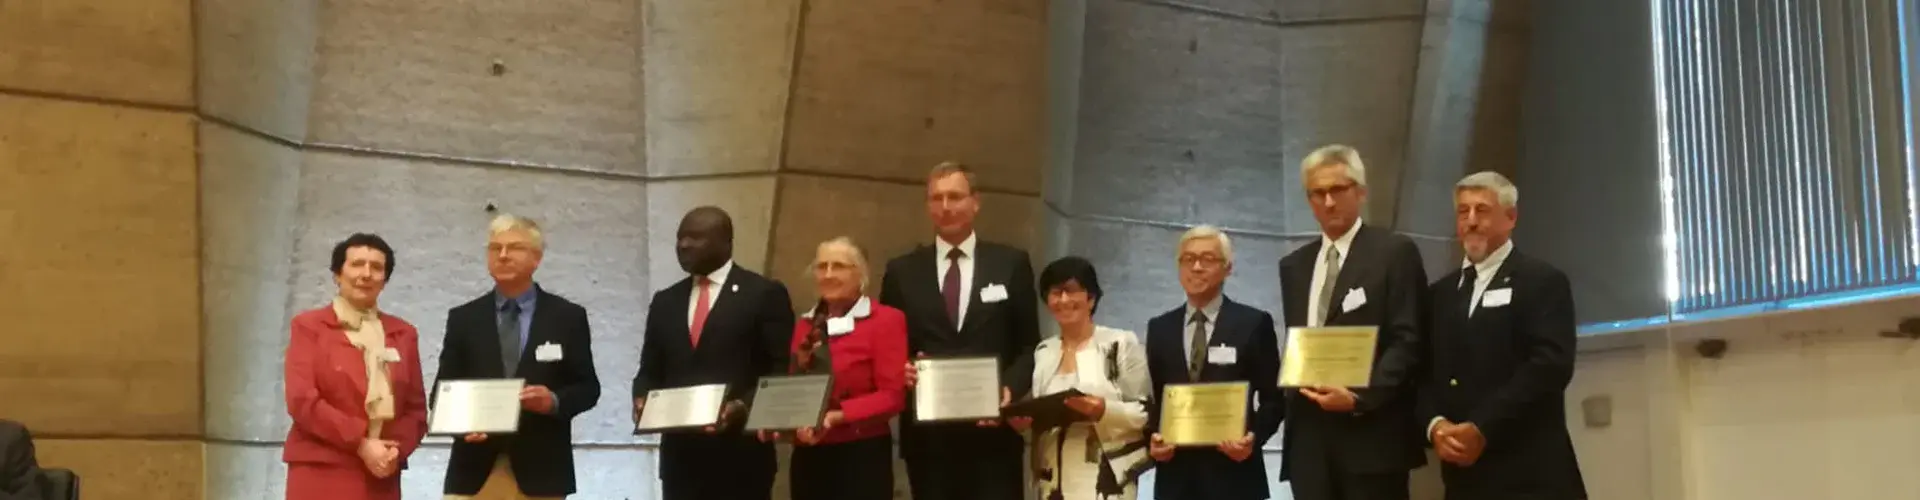 EGU President Alberto Montanari (second from right) on stage with other awardees at the IUGG event